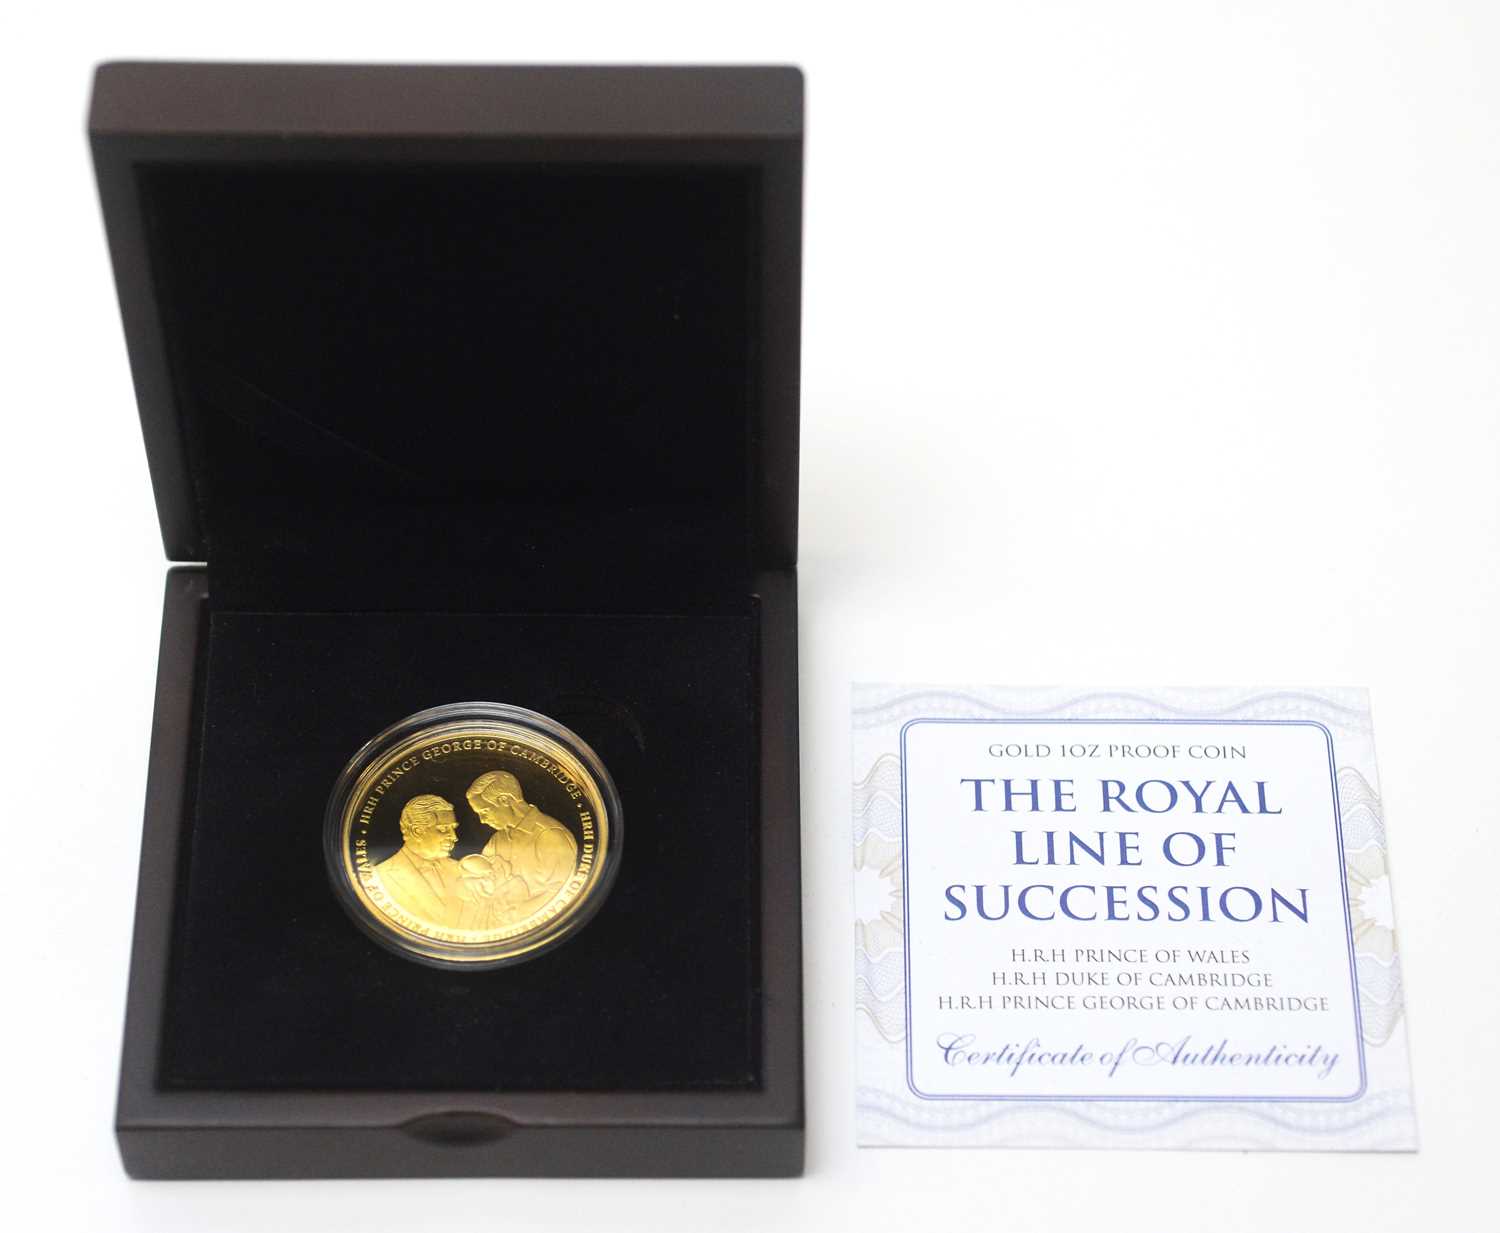 Lot 22 - The Royal Line of Succession $200 gold Cook Islands gold coin